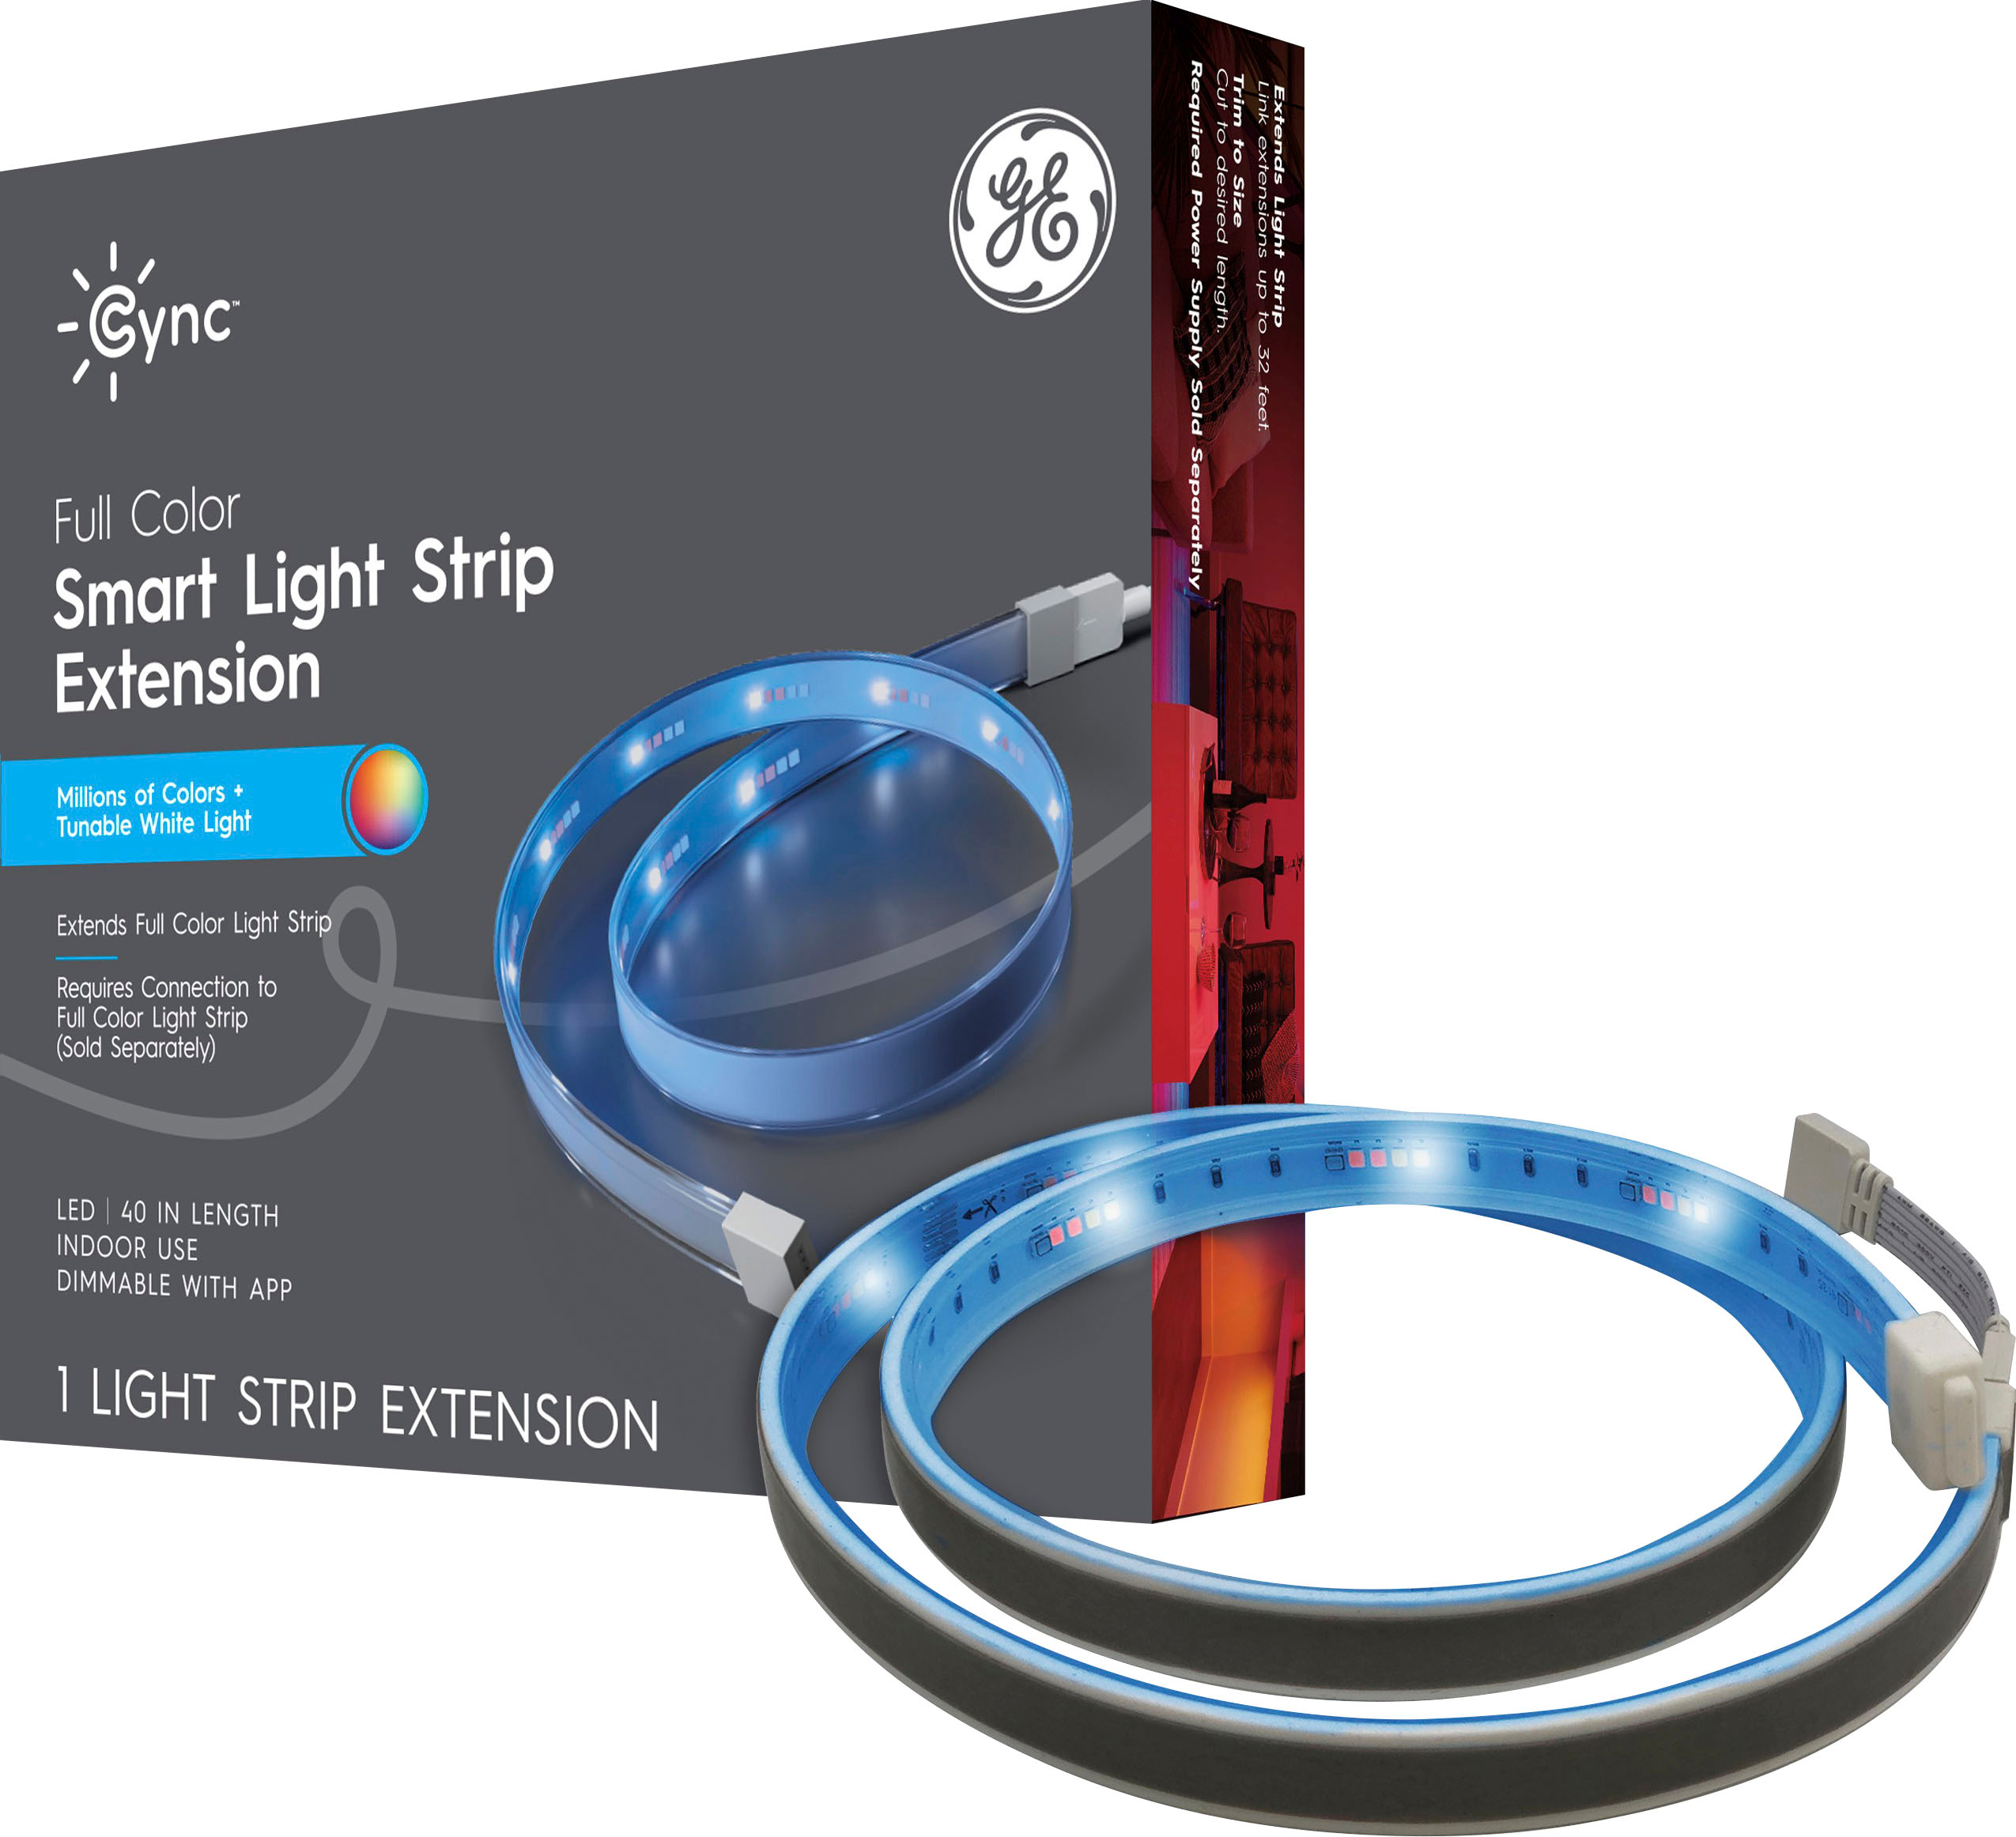 GE - CYNC Smart Direct Connect LED Strip Lights (40-inch Smart LED Strip Extension) - Full Color